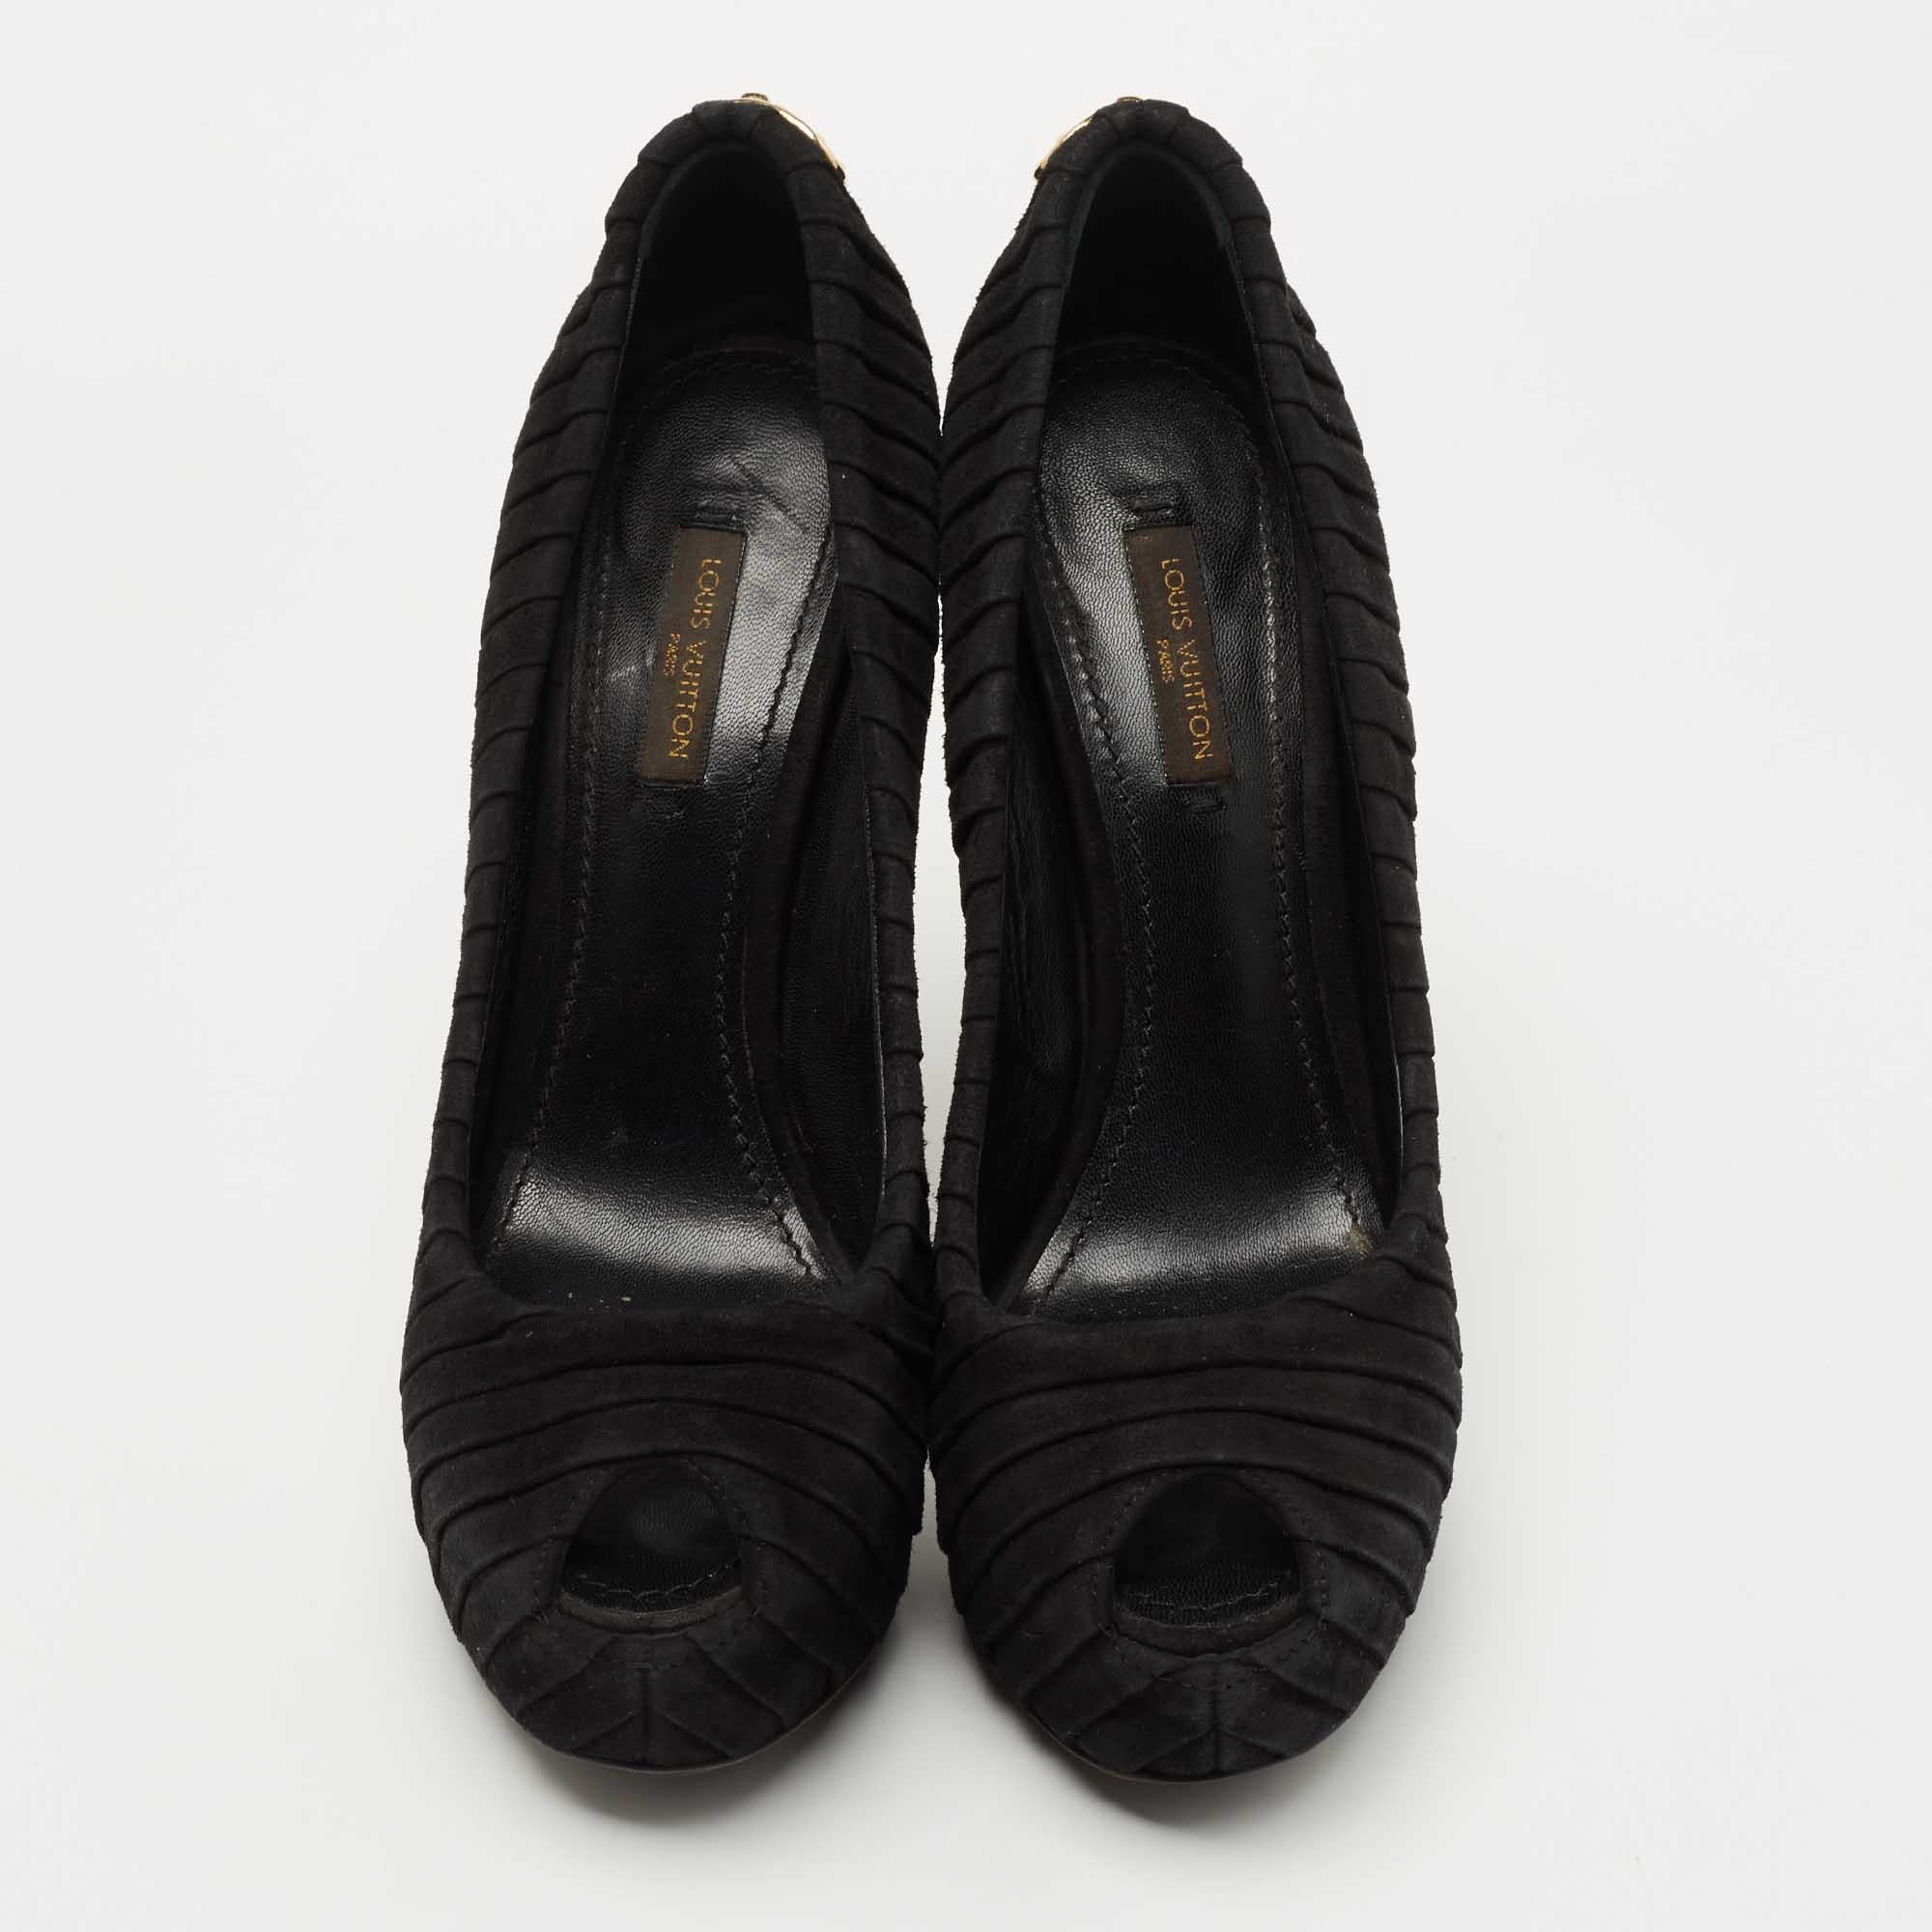 Exhibit an elegant style with this pair of pumps. These designer pumps are crafted from quality materials. They are set on durable soles and high heels.